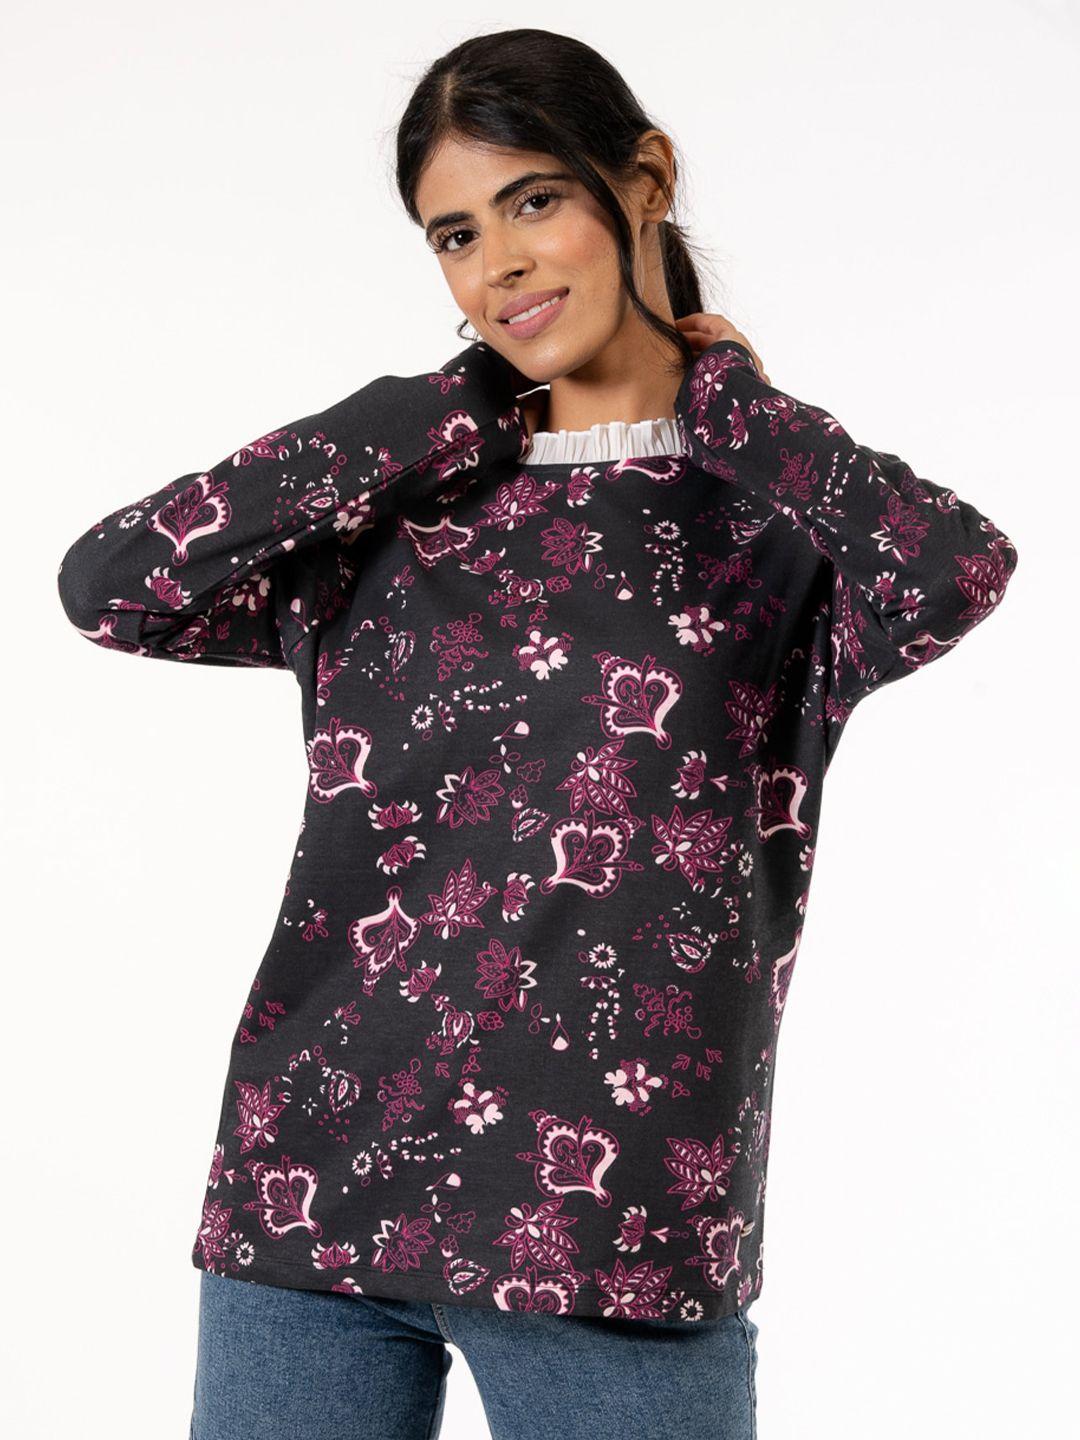 harbour 9 floral printed cotton pullover